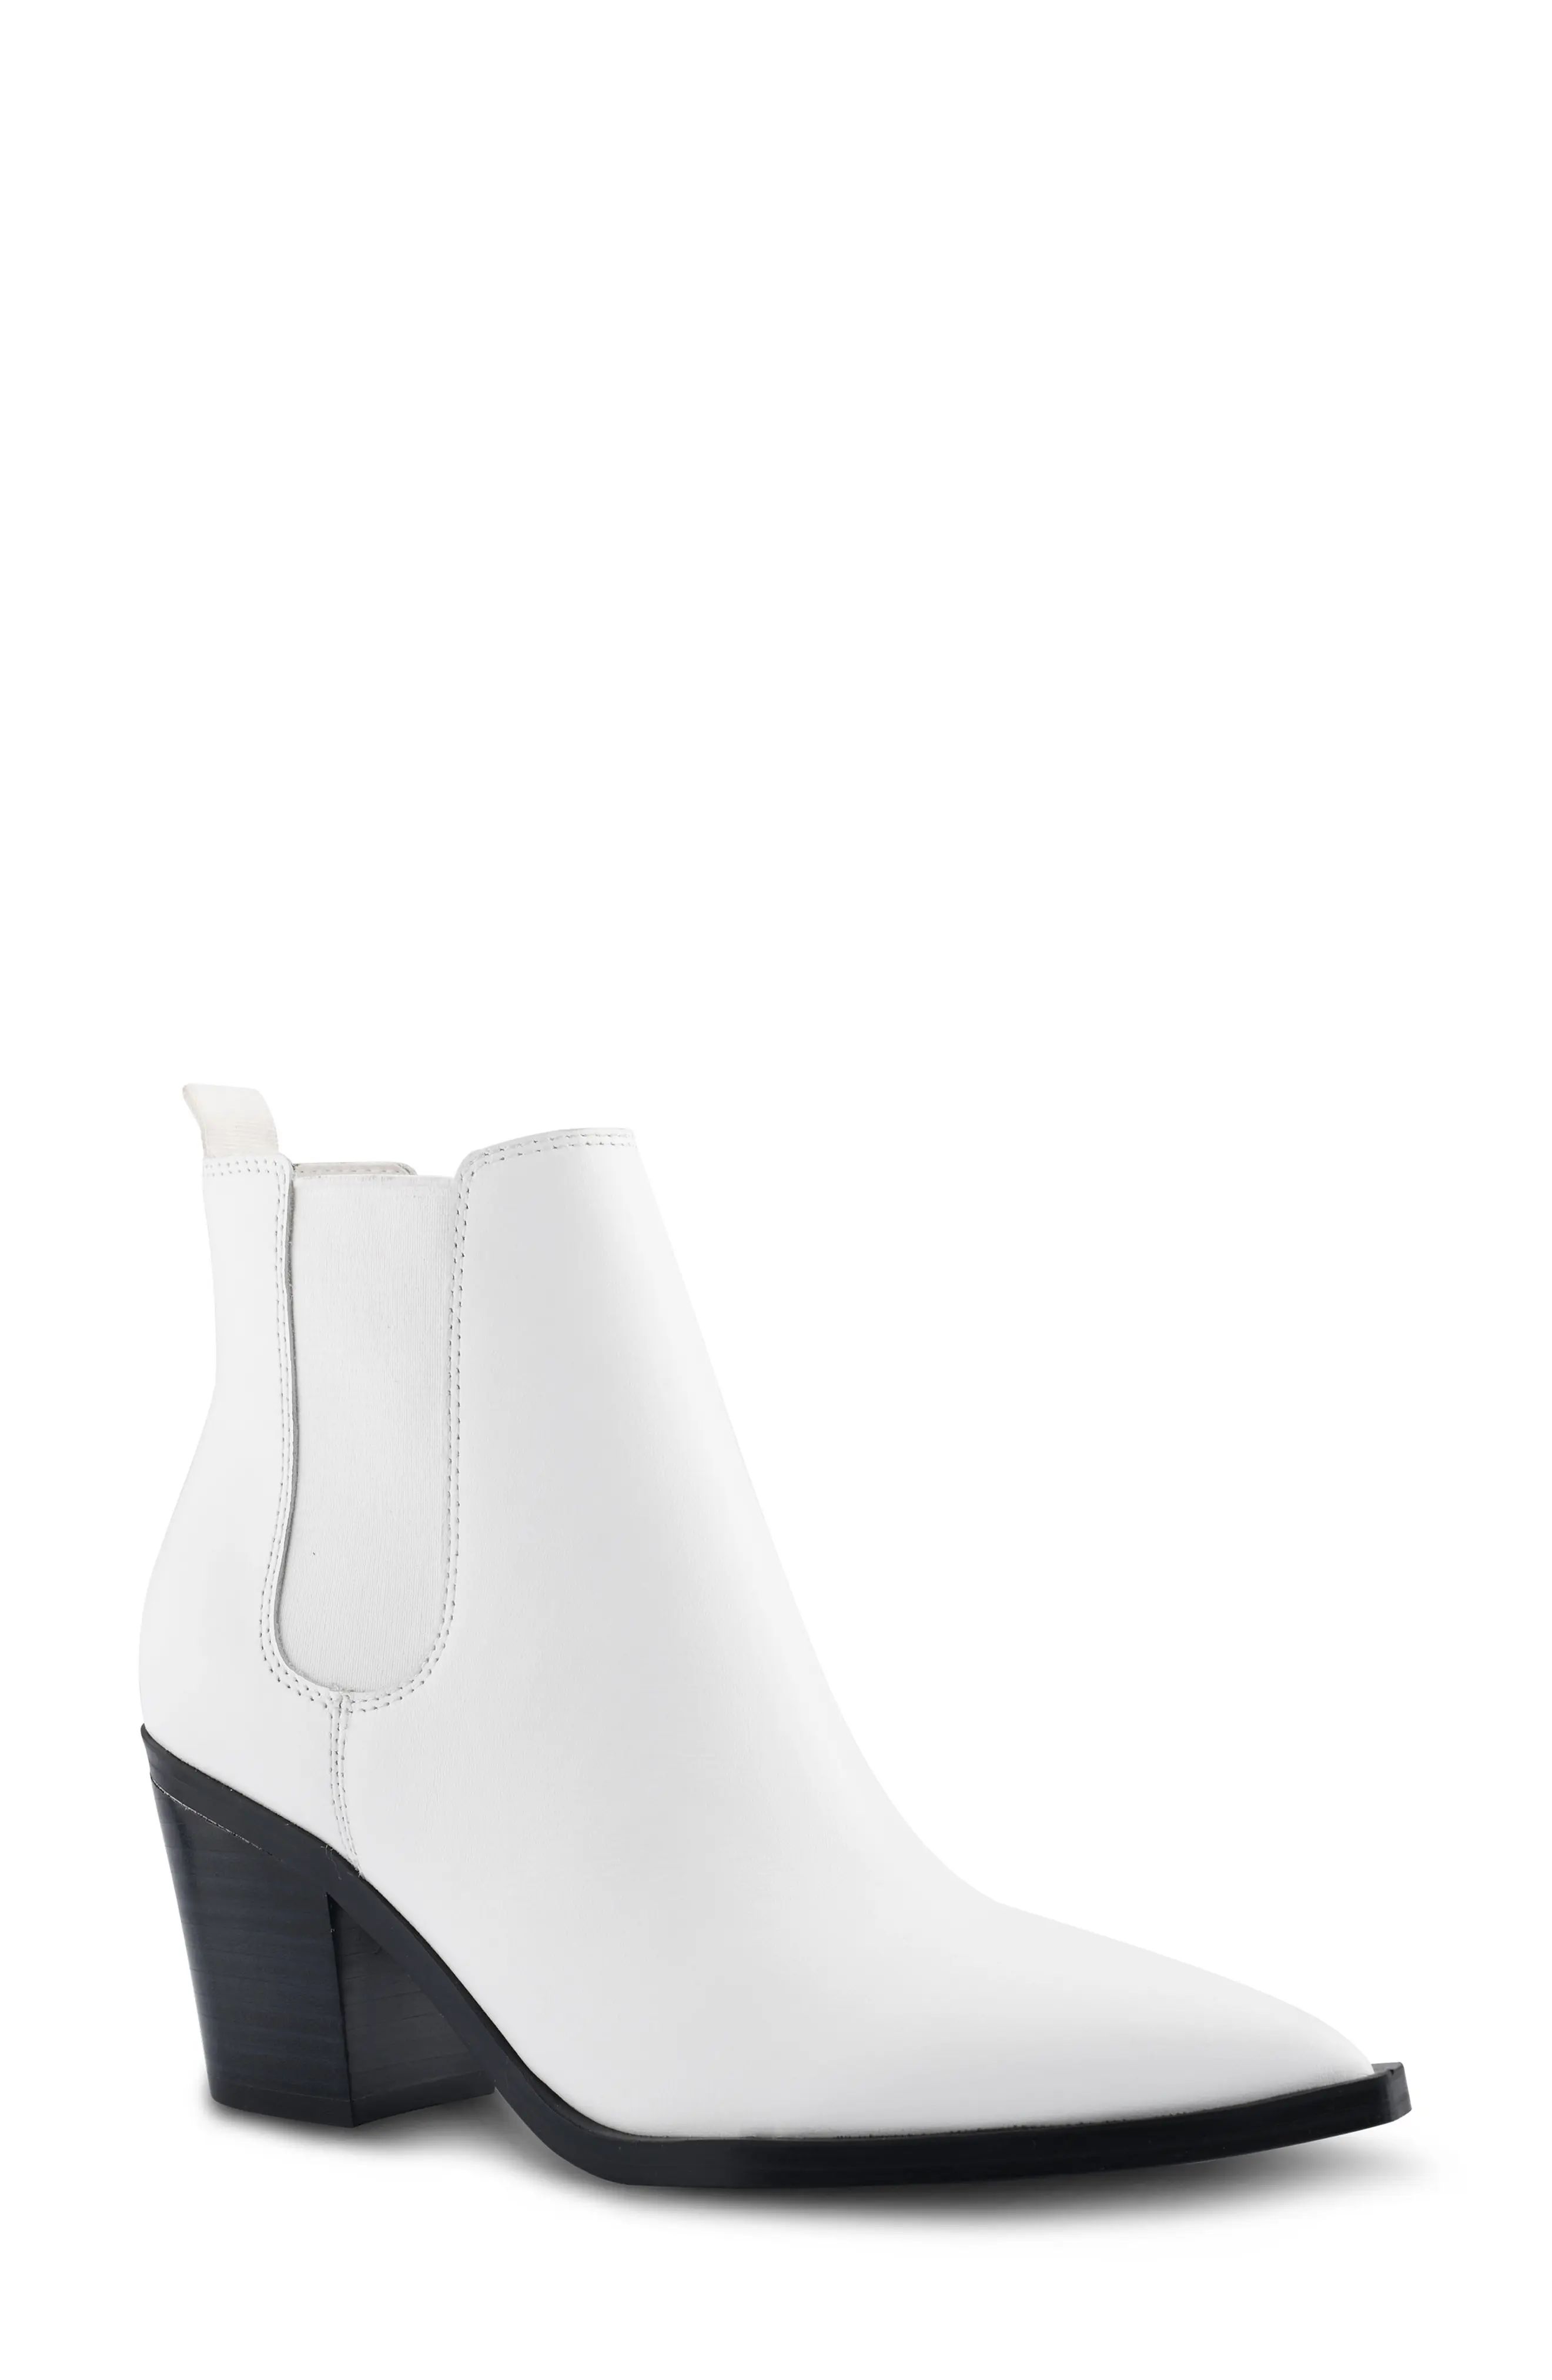 Nine West Wyllis Boot, Size 8 in White Leather at Nordstrom | Nordstrom